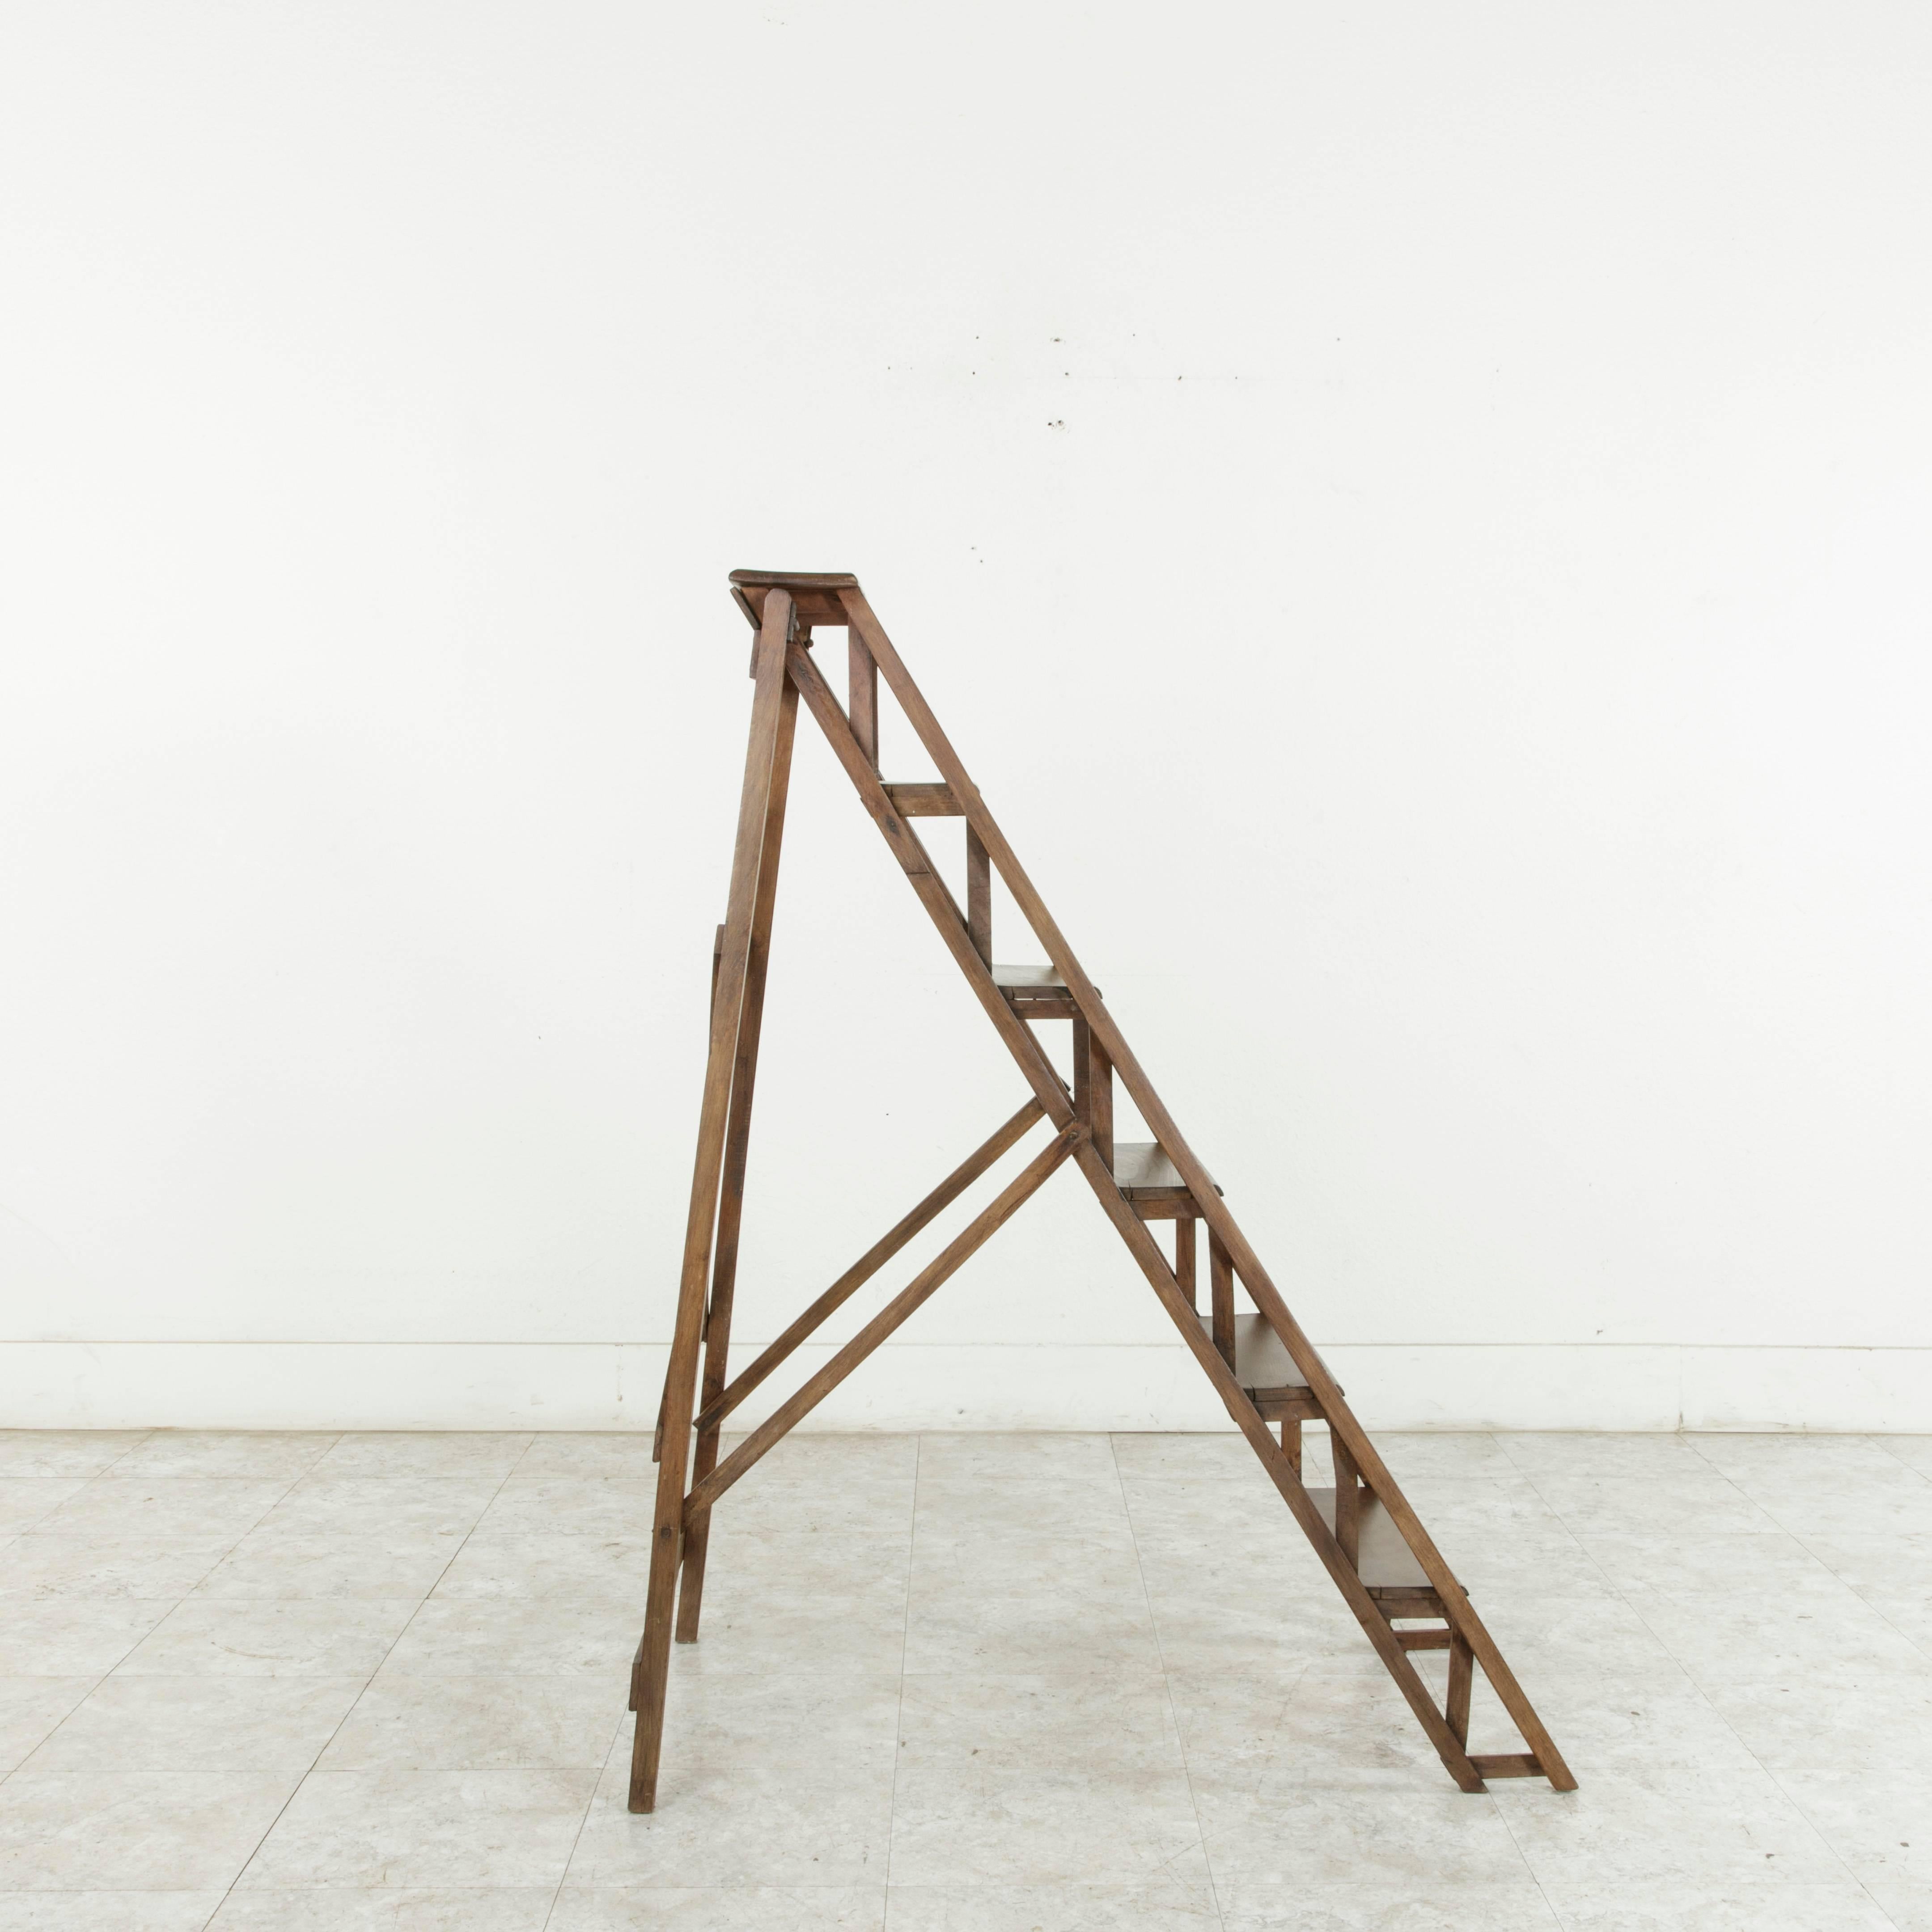 Originally used in a French library, this folding ladder constructed of ash would be a handsome addition to any space with hard to reach shelving. While still being utilitarian, this ladder also maintains an artistic presence that allows its six